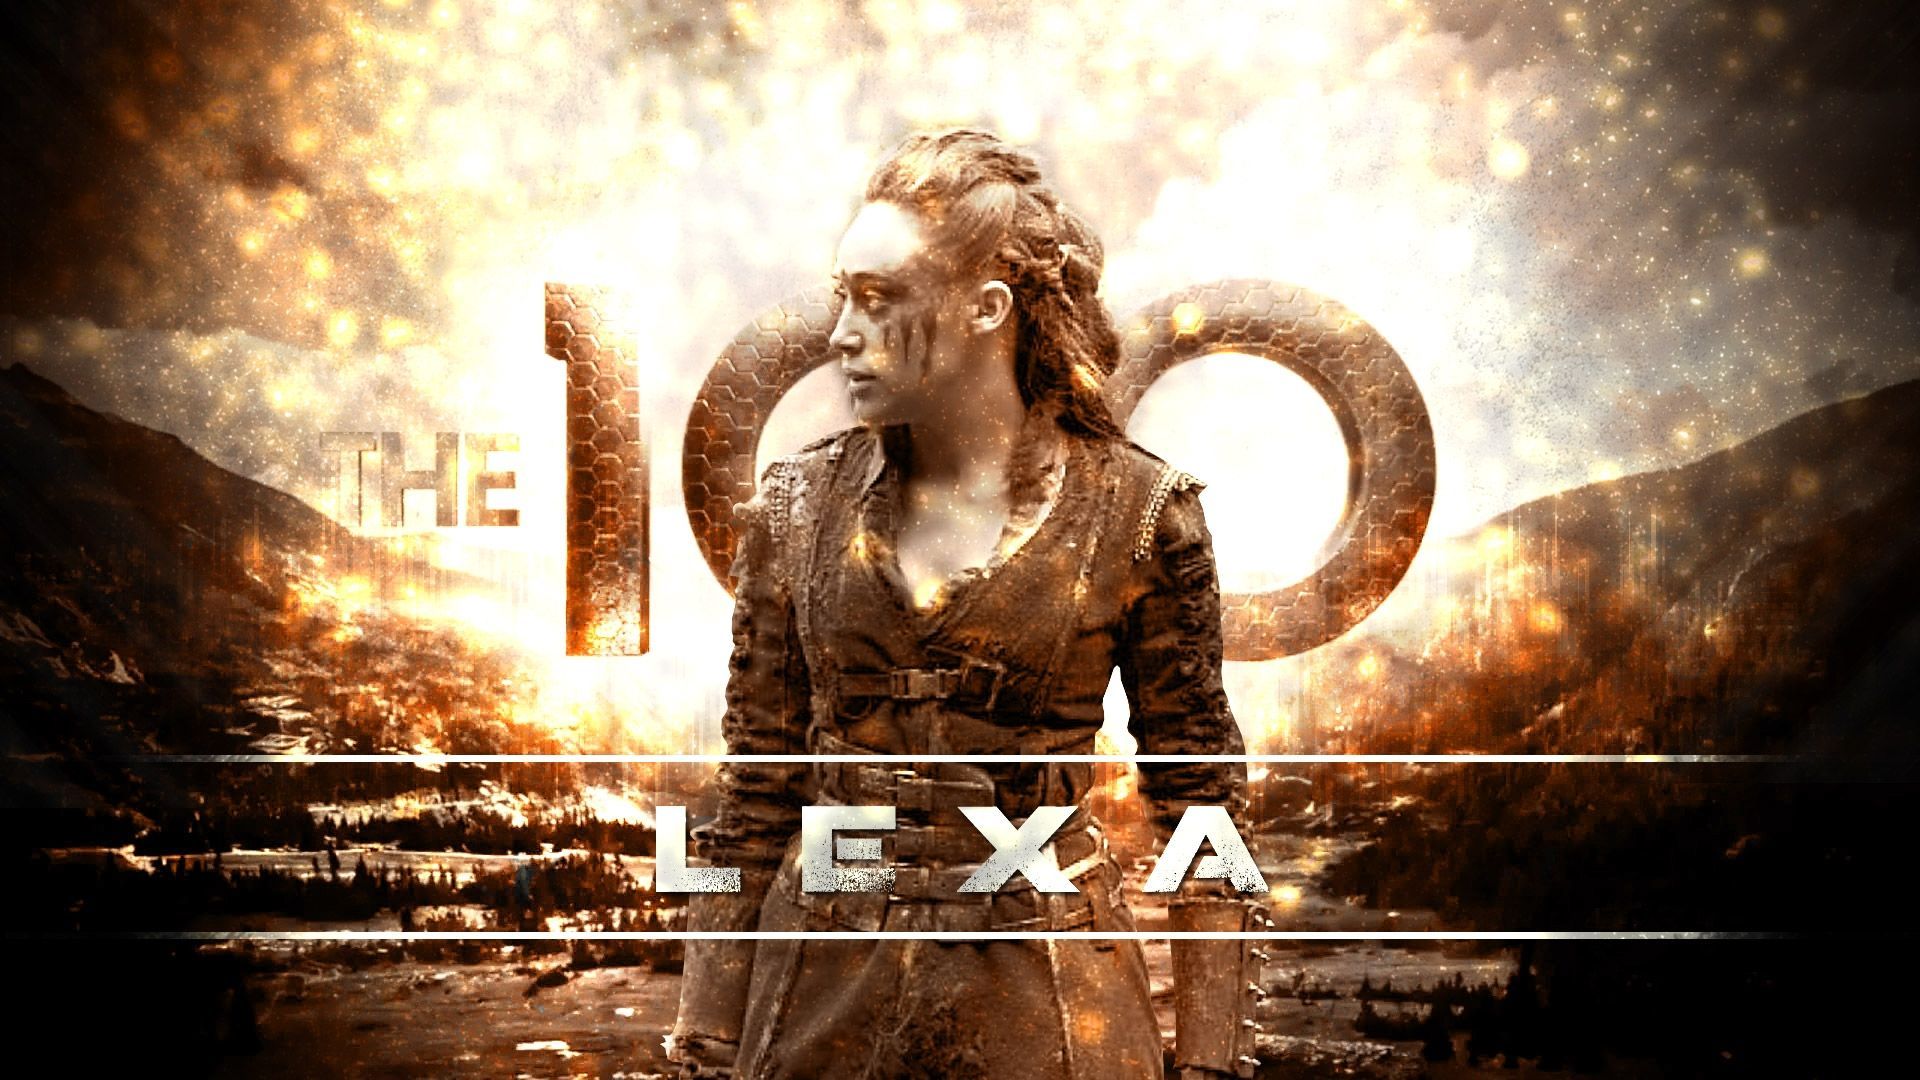 Lexa The 100 Wallpaper, HD widescreen wallpaper of Lexa, one of the main characters in The 100 TV series. in 2019